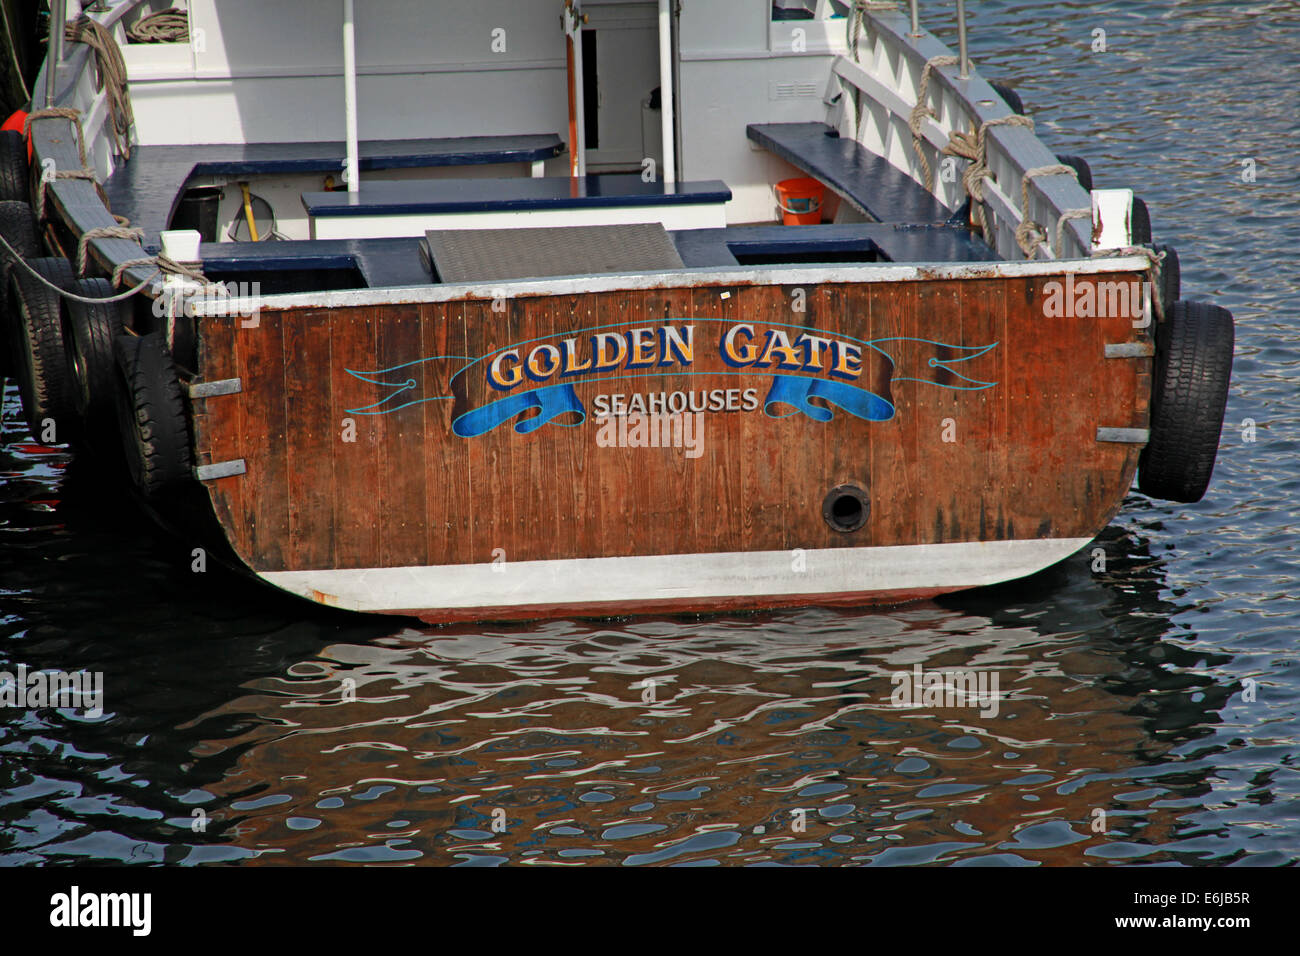 Golden Gate fishing boat and Farne Islands Boat Trips, at Seahouses, NE England Northumberland, UK Stock Photo